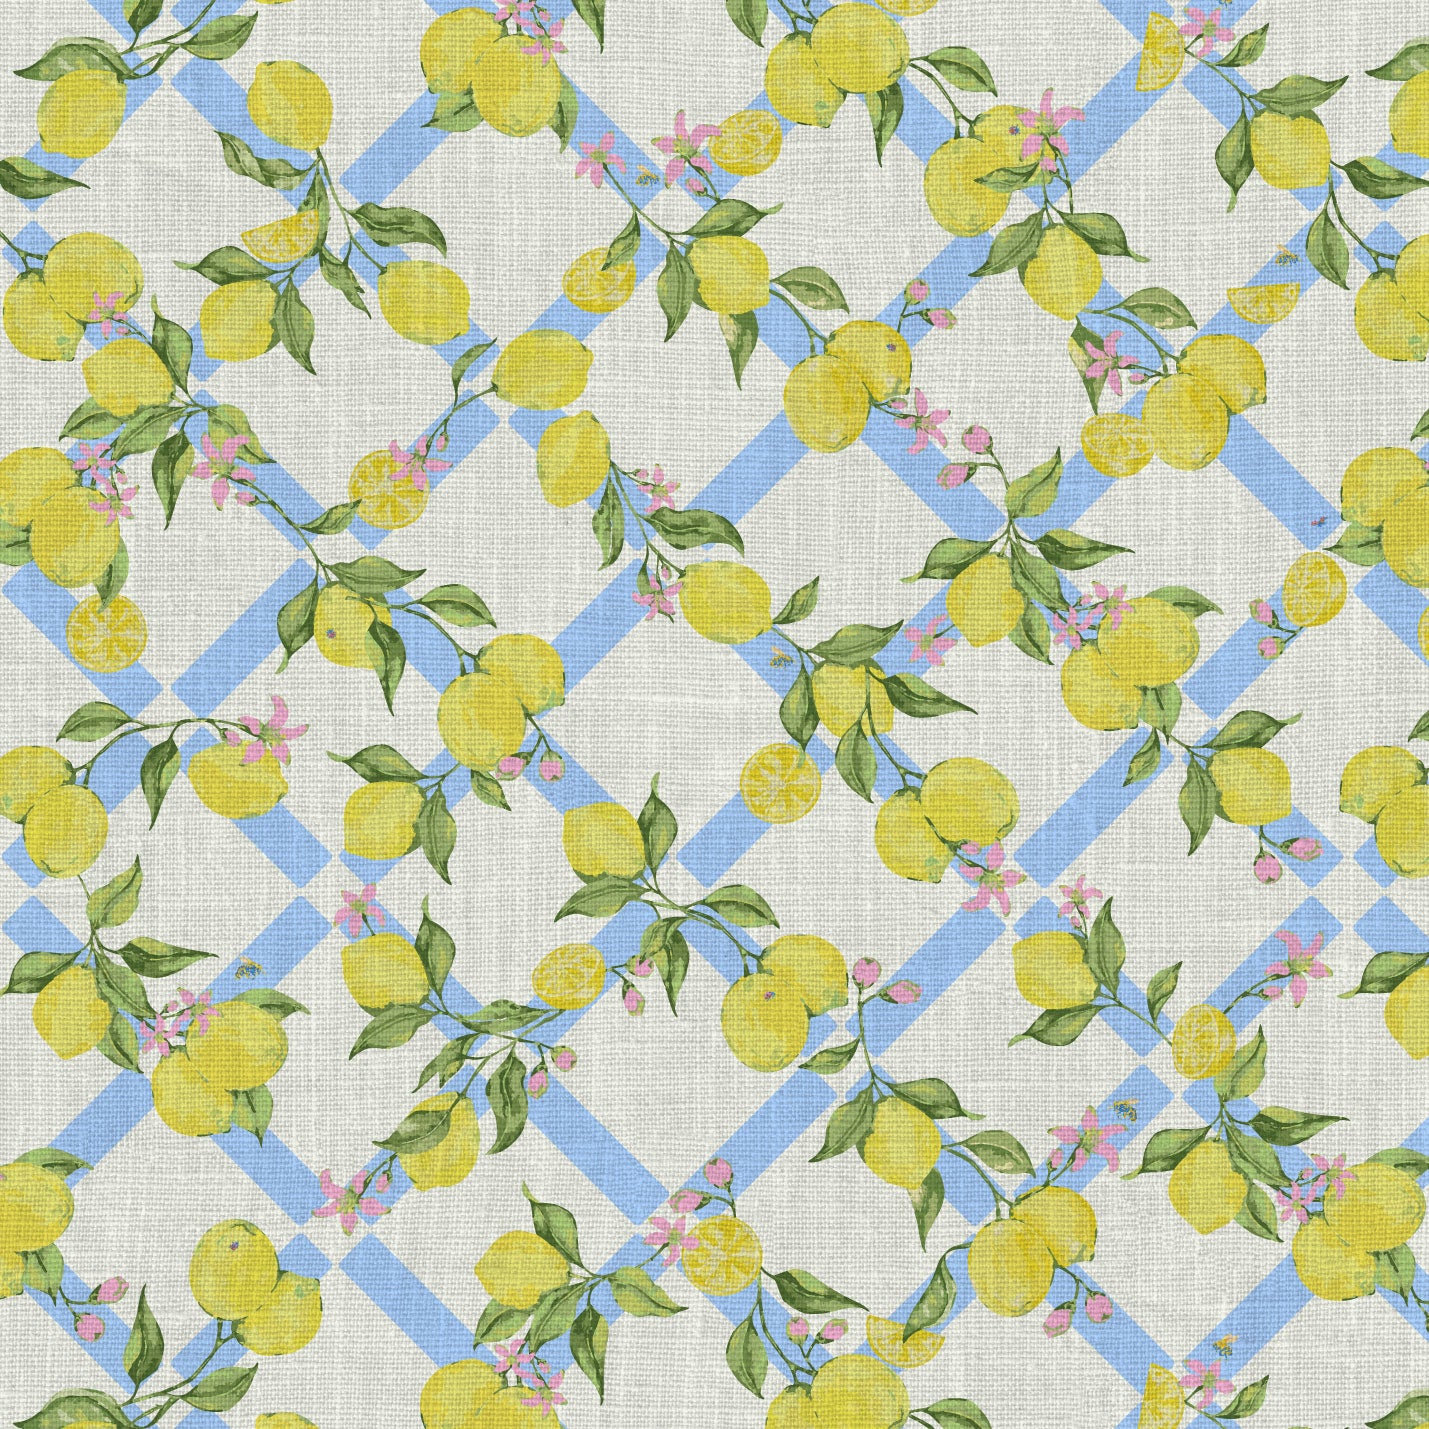 Linen wallpaper Natural Textured Eco-Friendly Non-toxic Sustainable Interior Design Retro chic Grand millennial Maximalism Traditional Dopamine decorCoastal Garden Seaside Seashore Waterfront Vacation home styling Retreat Relaxed beach vibes Beach cottage Shoreline Oceanfront preppy Nature inspired Vertical Grid lemons fruit food Cottage core Countryside Vintage Imperfect Rural Farm core rustic stripe yellow pink flowers lattice botanical yellow green leaf french blue pale baby kids sky blue linen